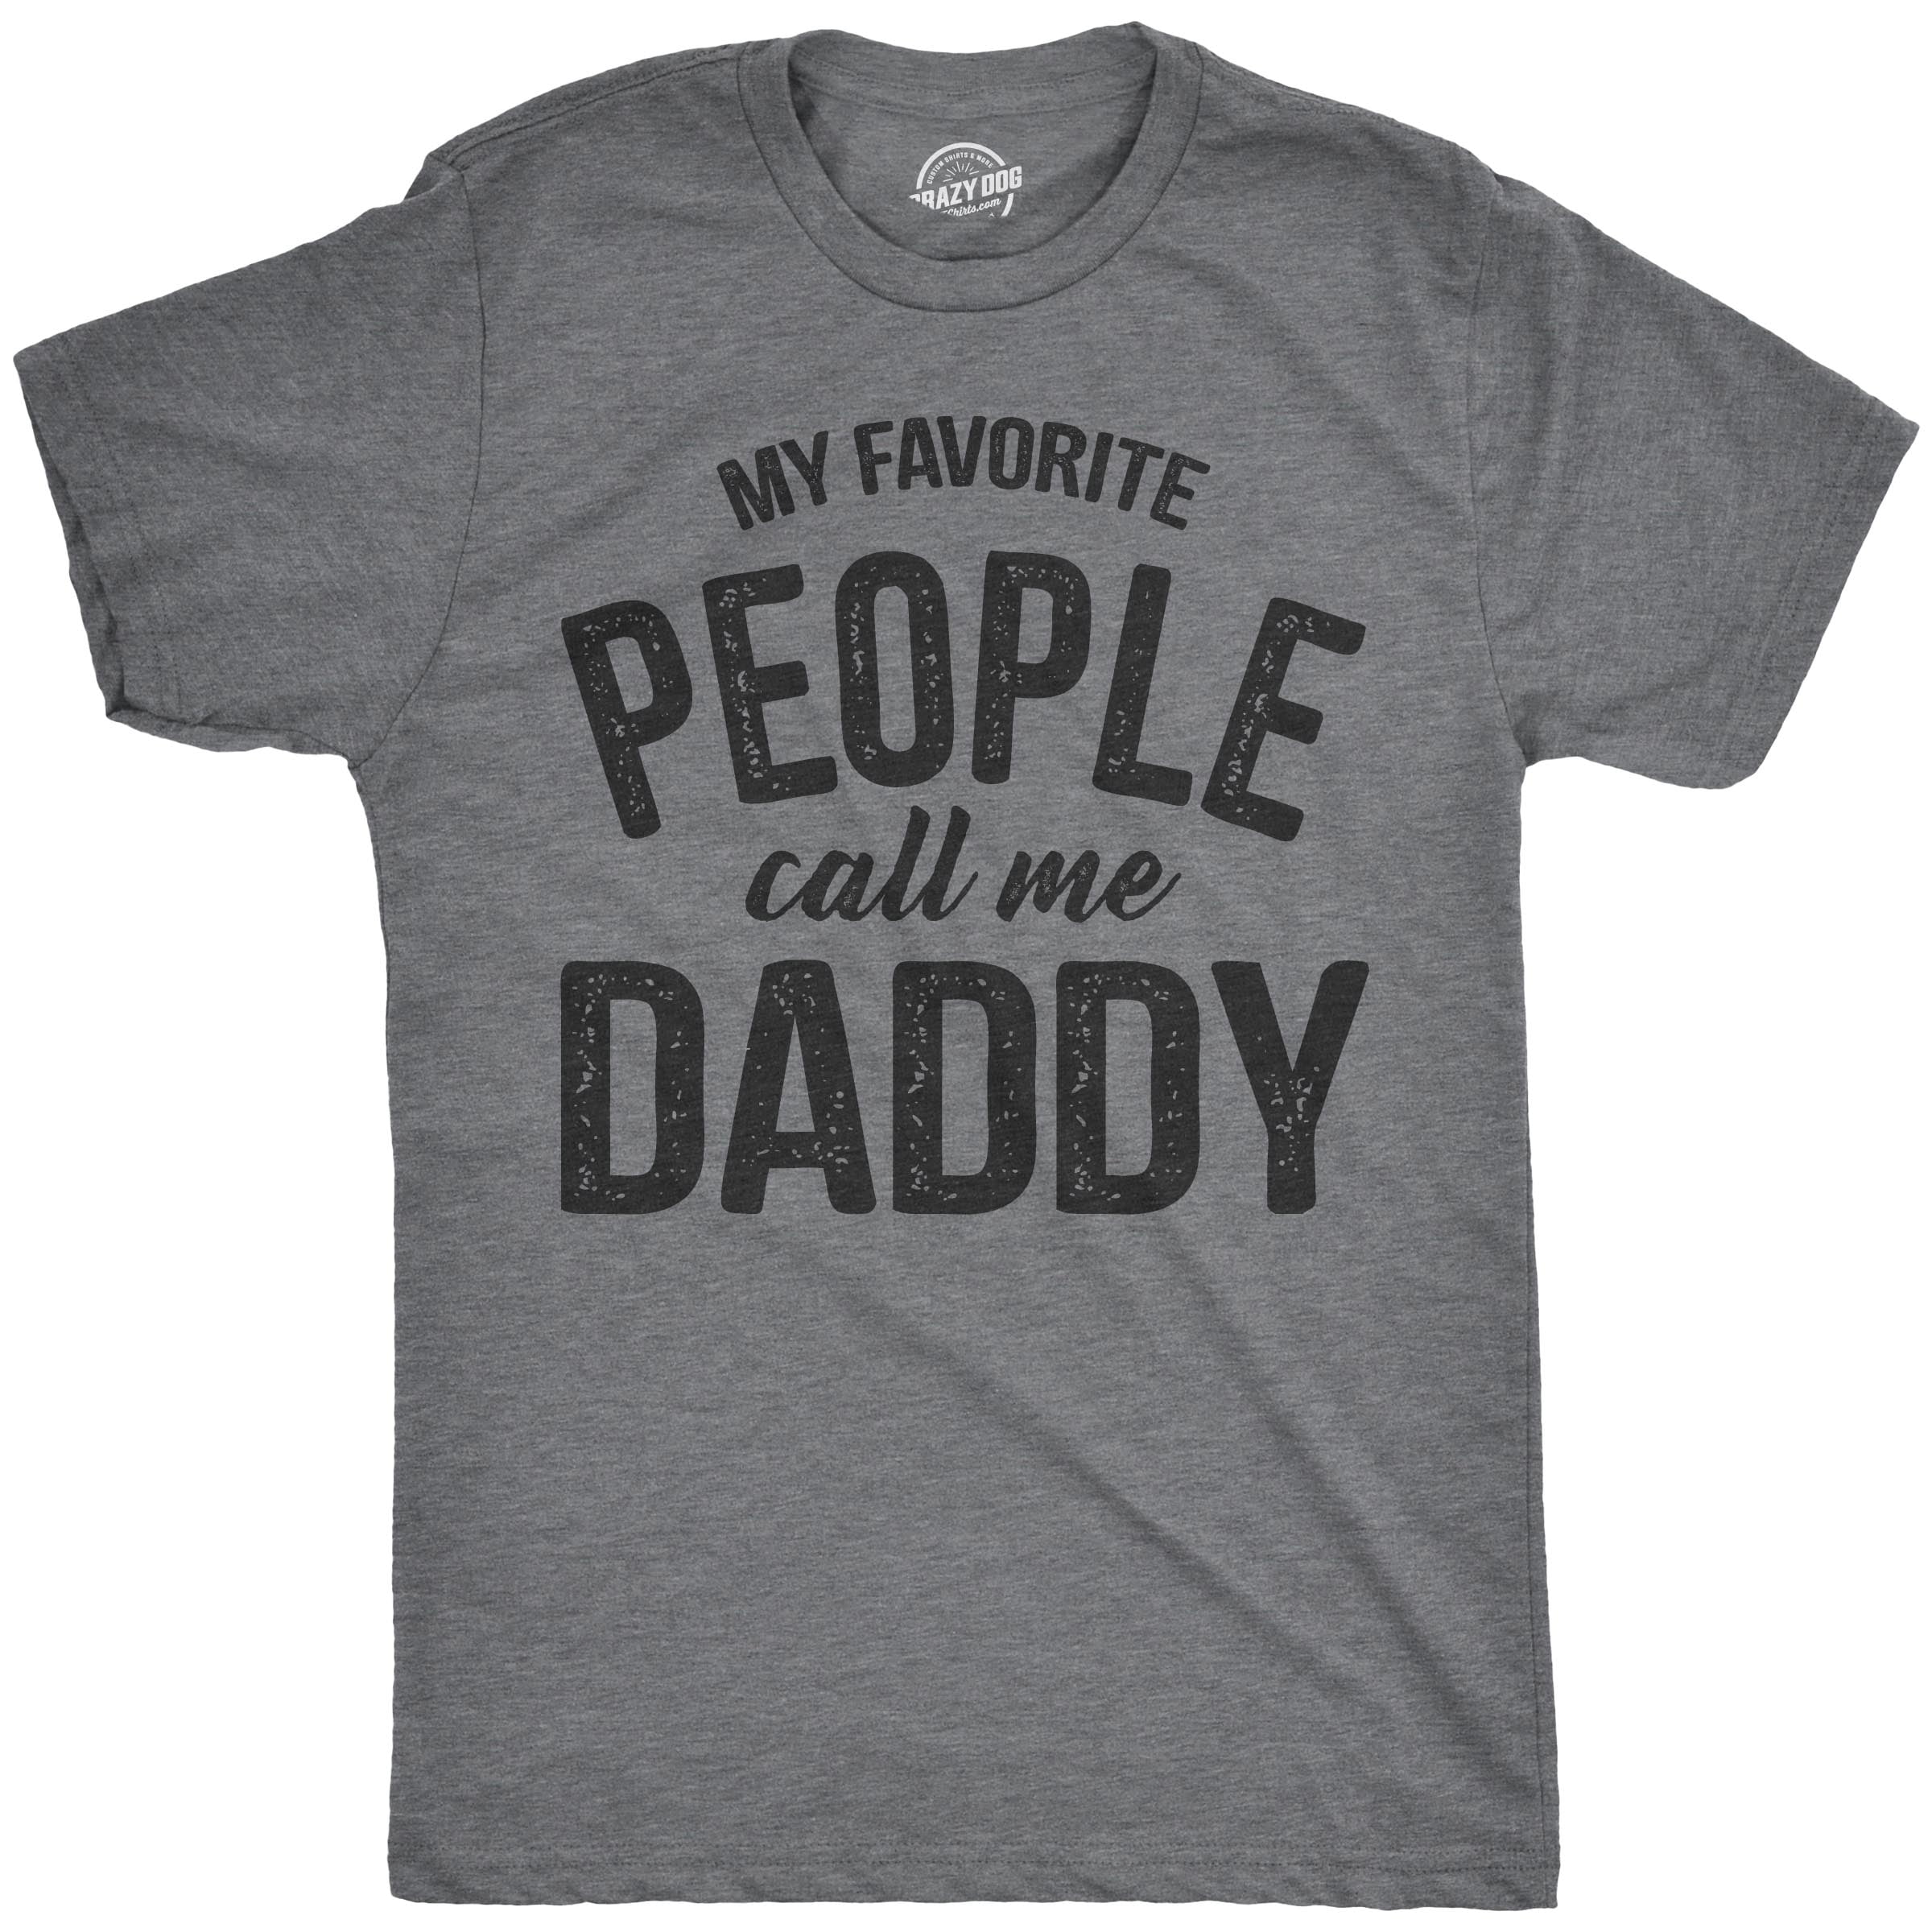 Dad of Daughter Fathers Day Shirt For Men Gifts for Dad Father's Day Gift Funny Dad Shirt Worlds Greatest Dad Shirt Best Dad Shirt